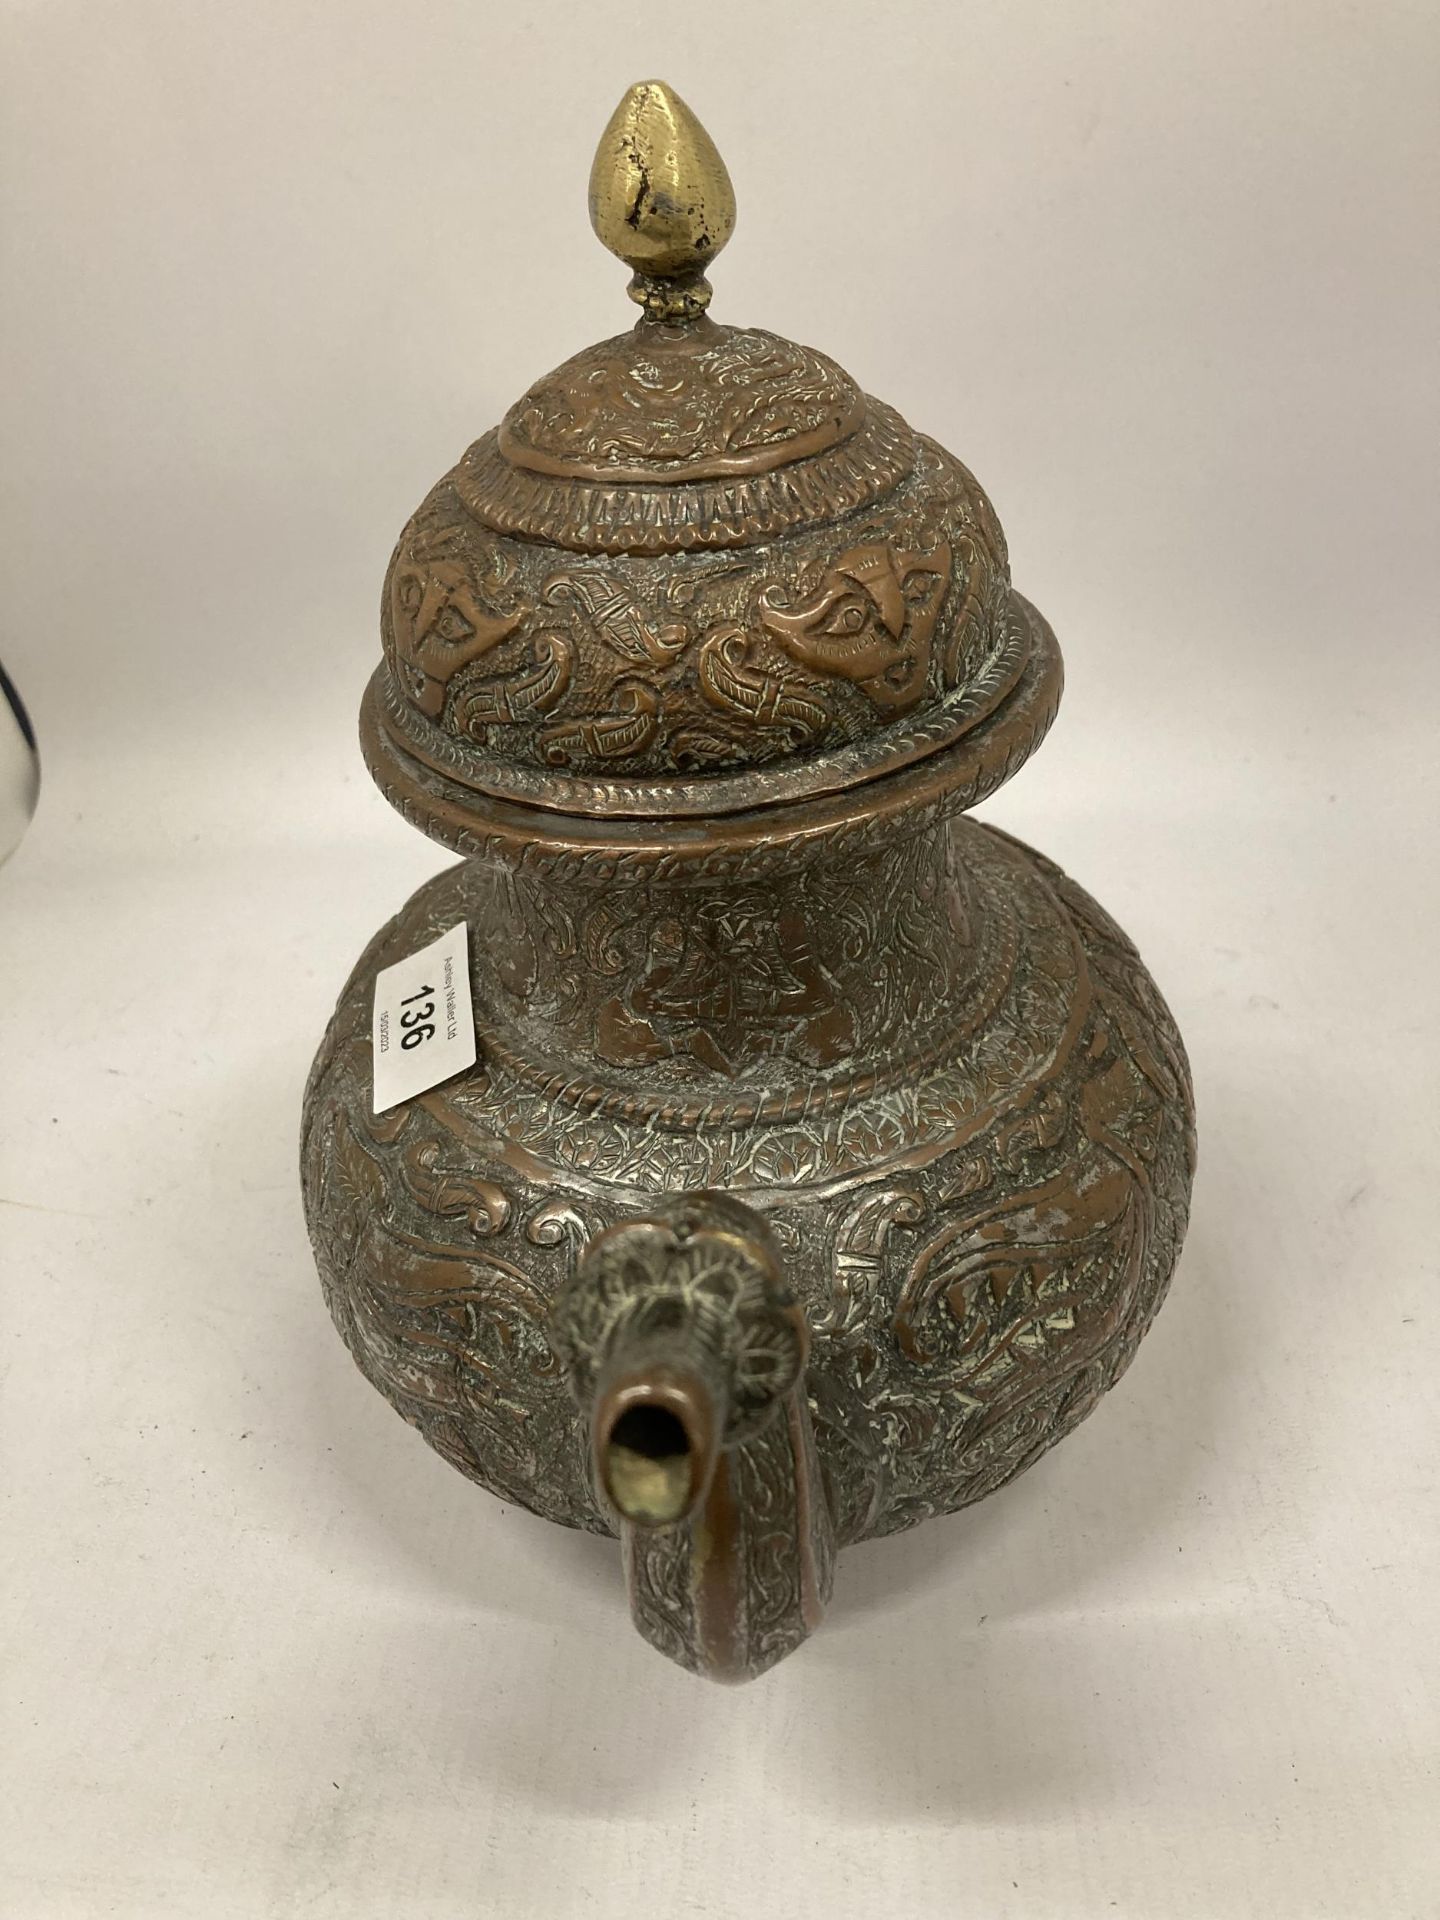 A LARGE COPPER AND BRASS COFFEE POT WITH ORNATE ENGRAVED DECORATION HEIGHT 28CM - Image 3 of 3